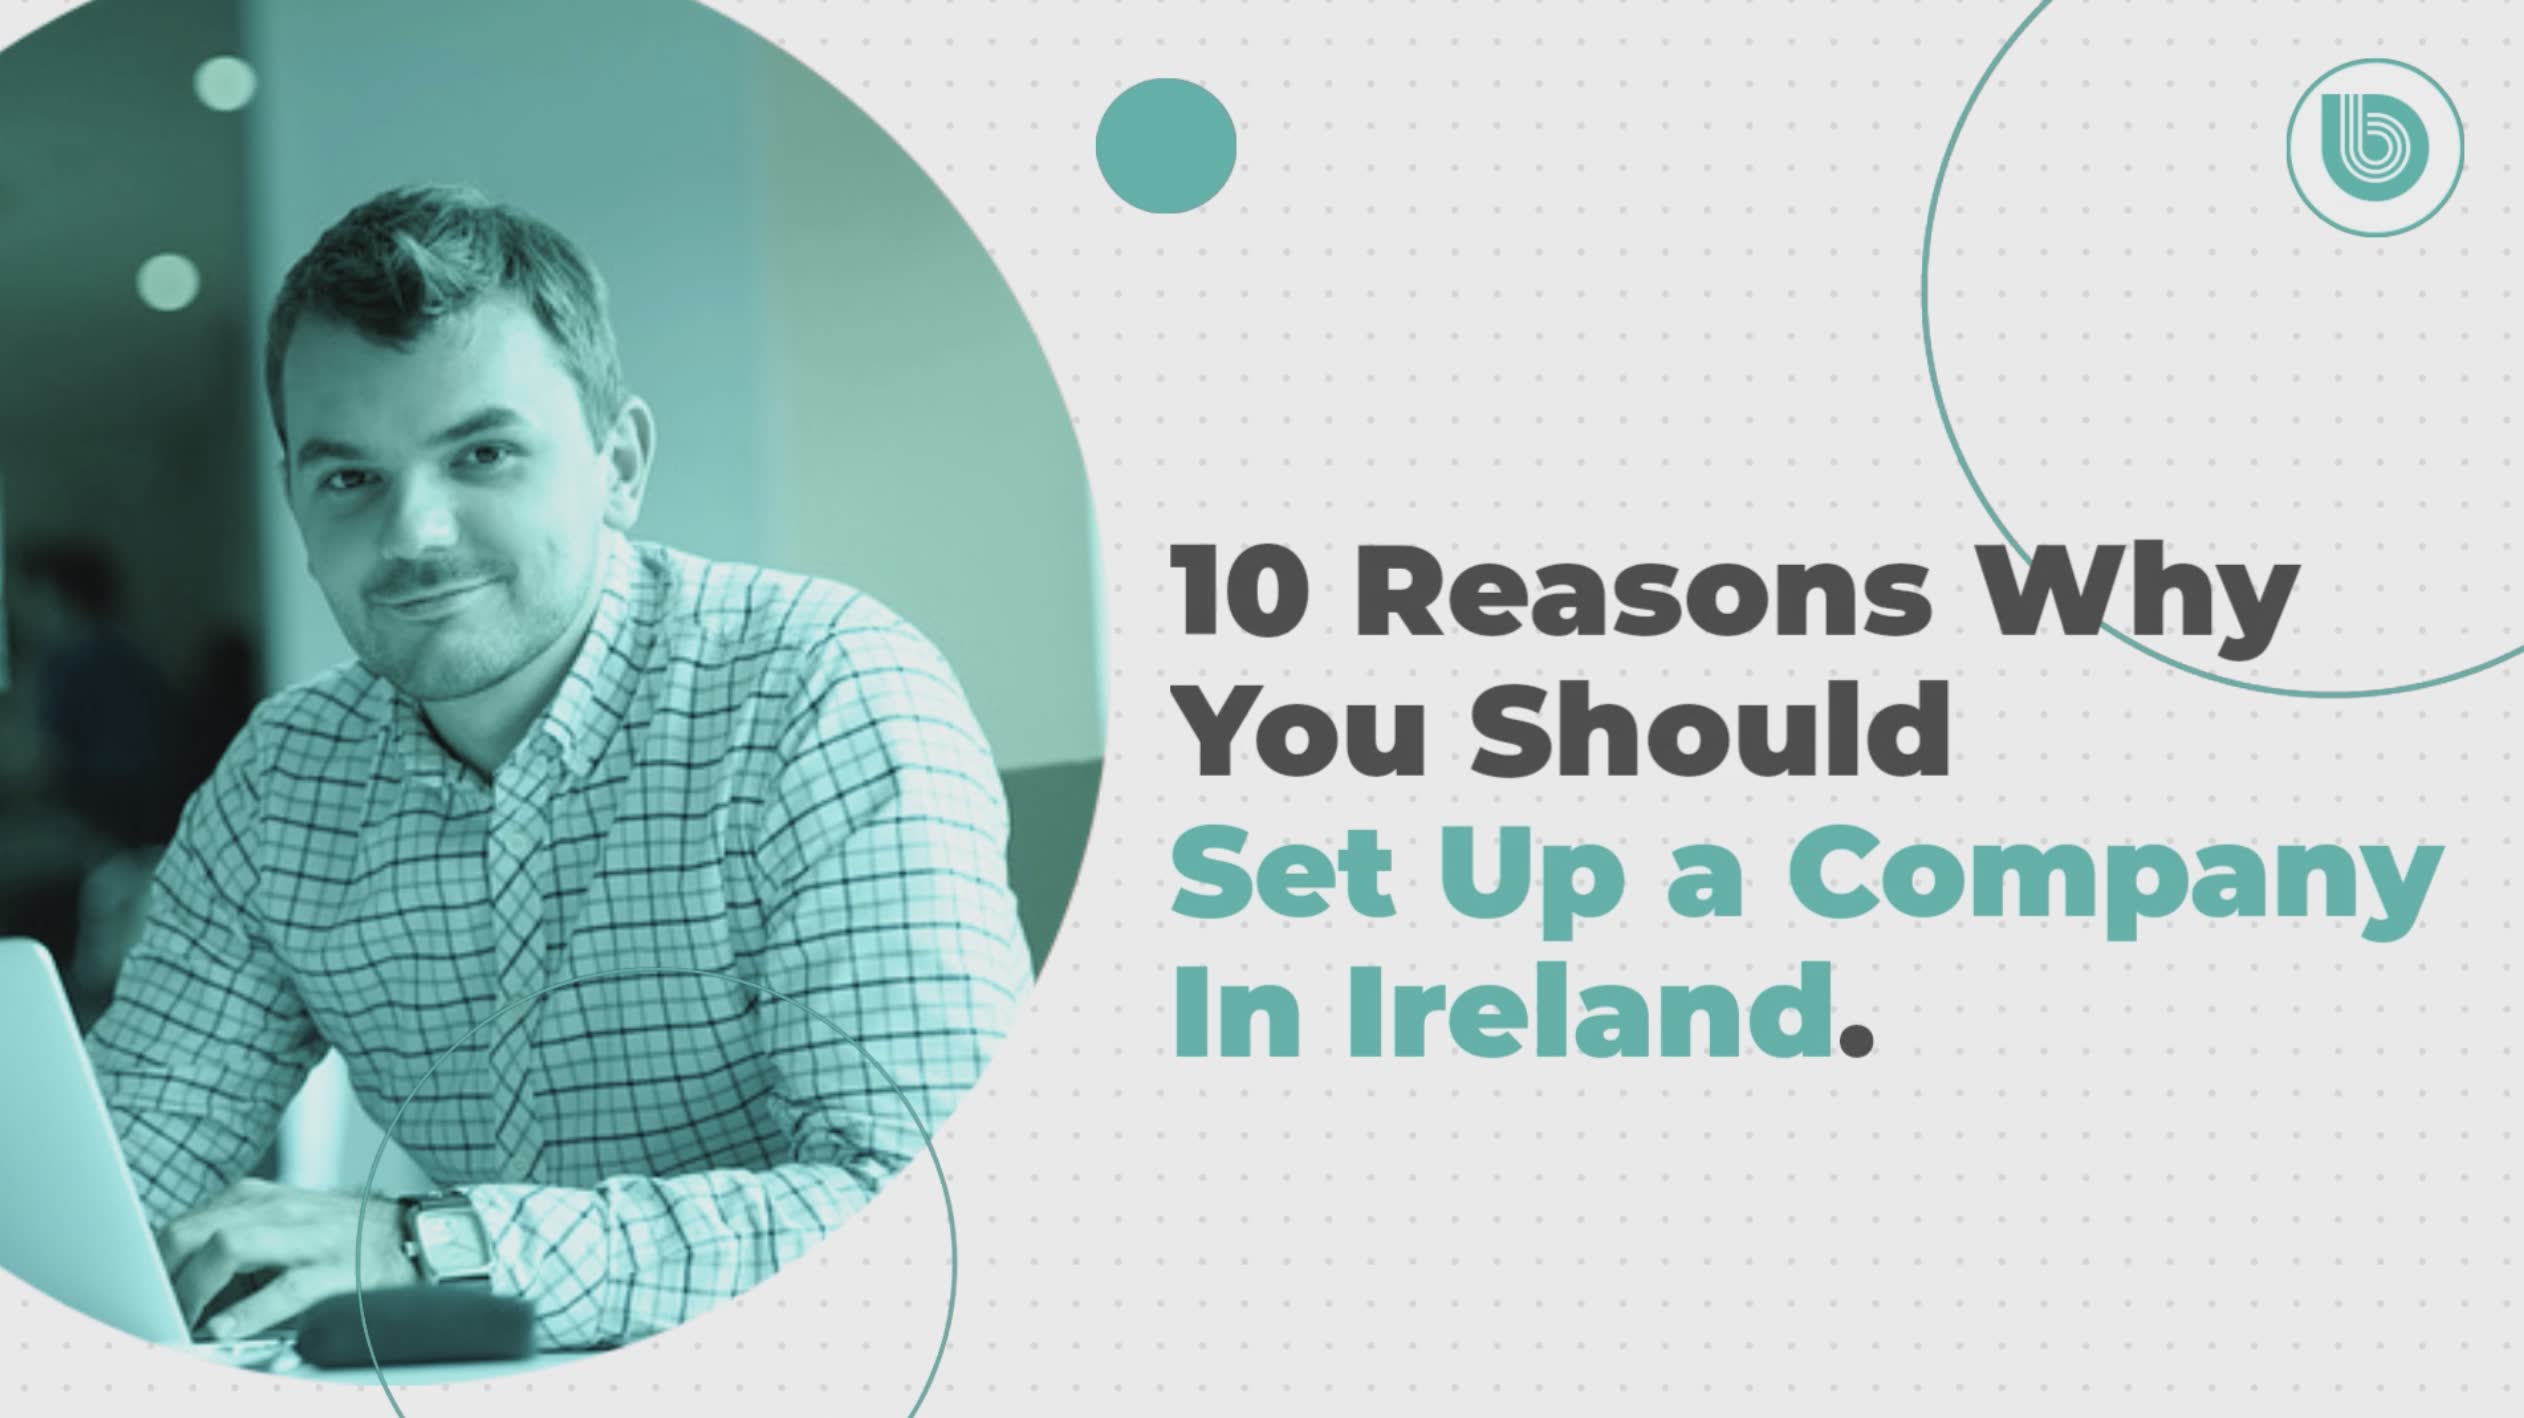 11 Benefits of Company Formation in Ireland for Overseas Business: A Guide to Tax Benefits and More 10